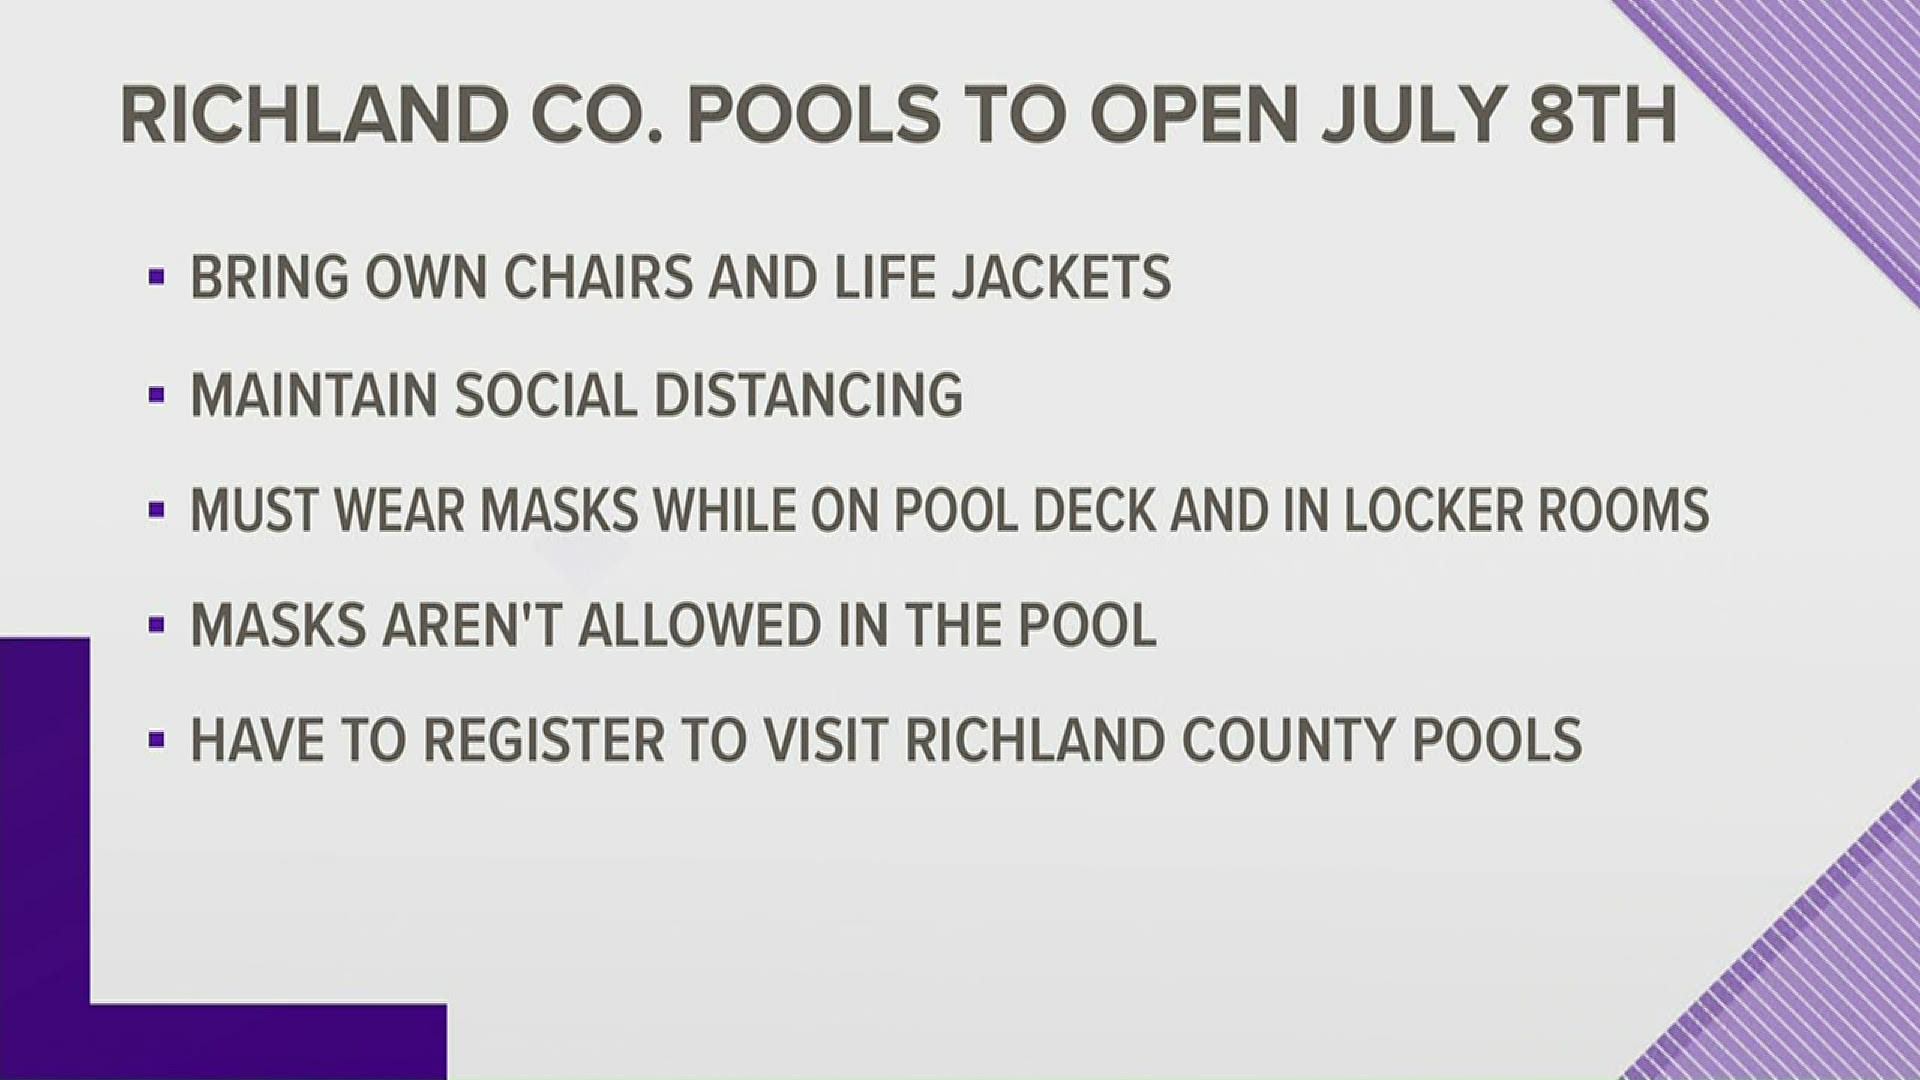 Richland County pools will be reopening this week. The Recreation Commission shares important reminders about using its pools.